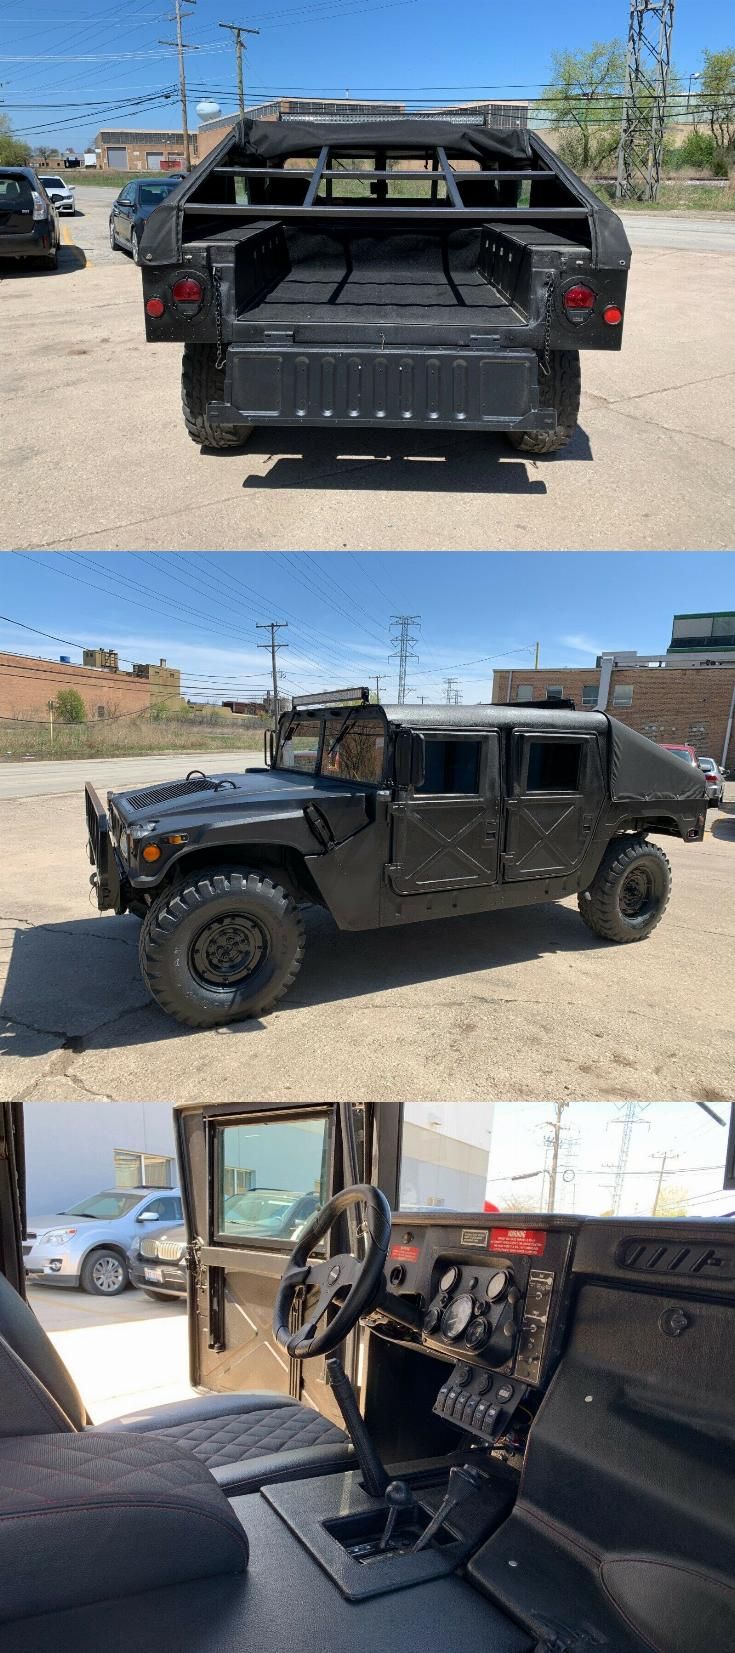 Pin on Military vehicles for sale